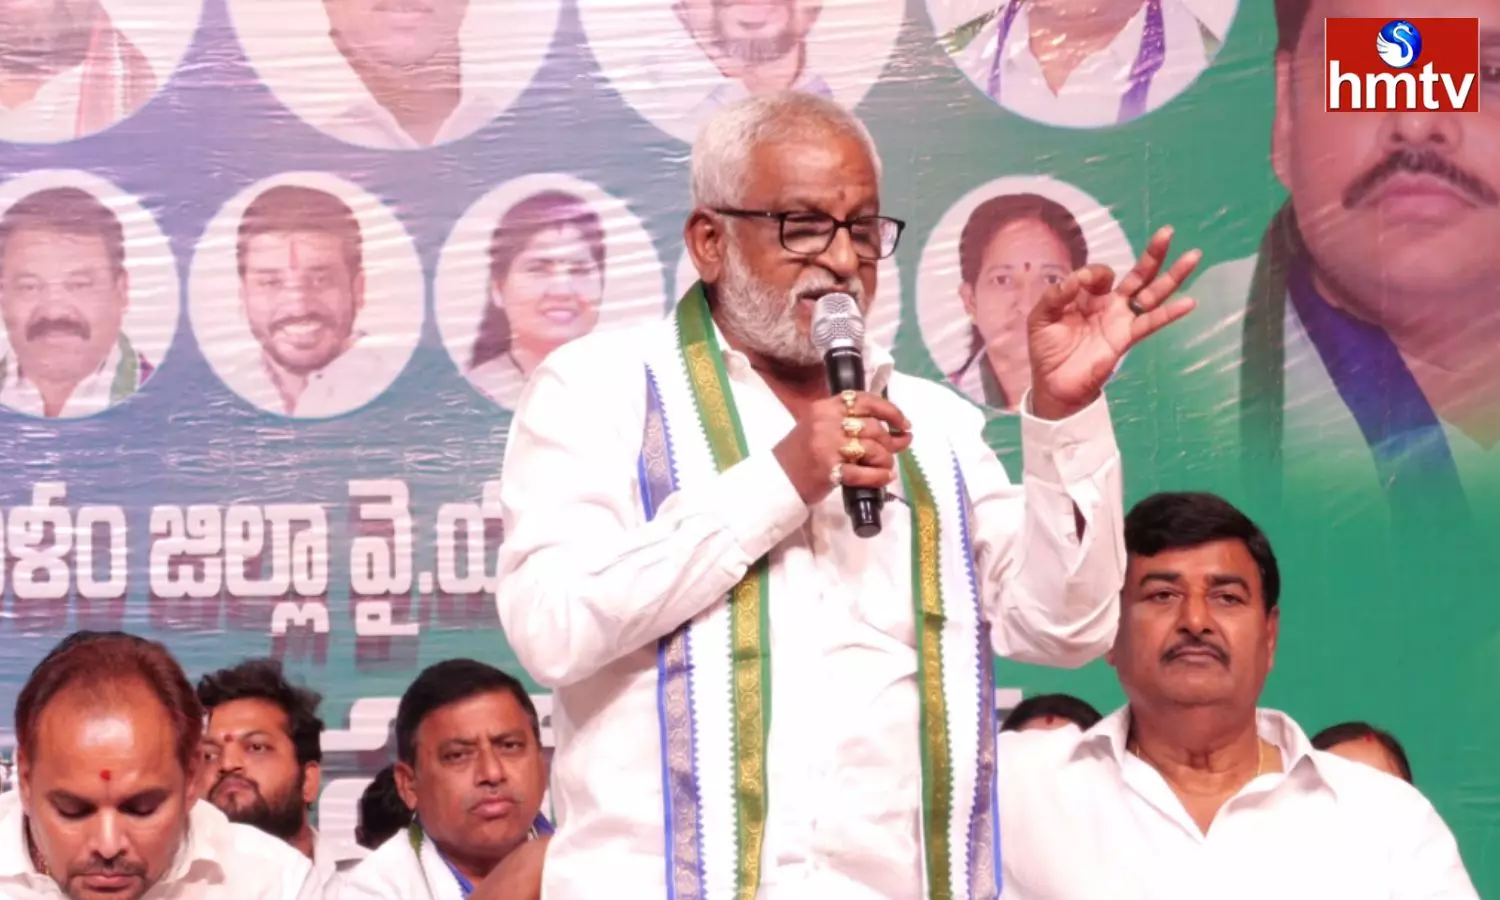 Our Aim Is The Development Of Srikakulam District Says Y V Subba Reddy